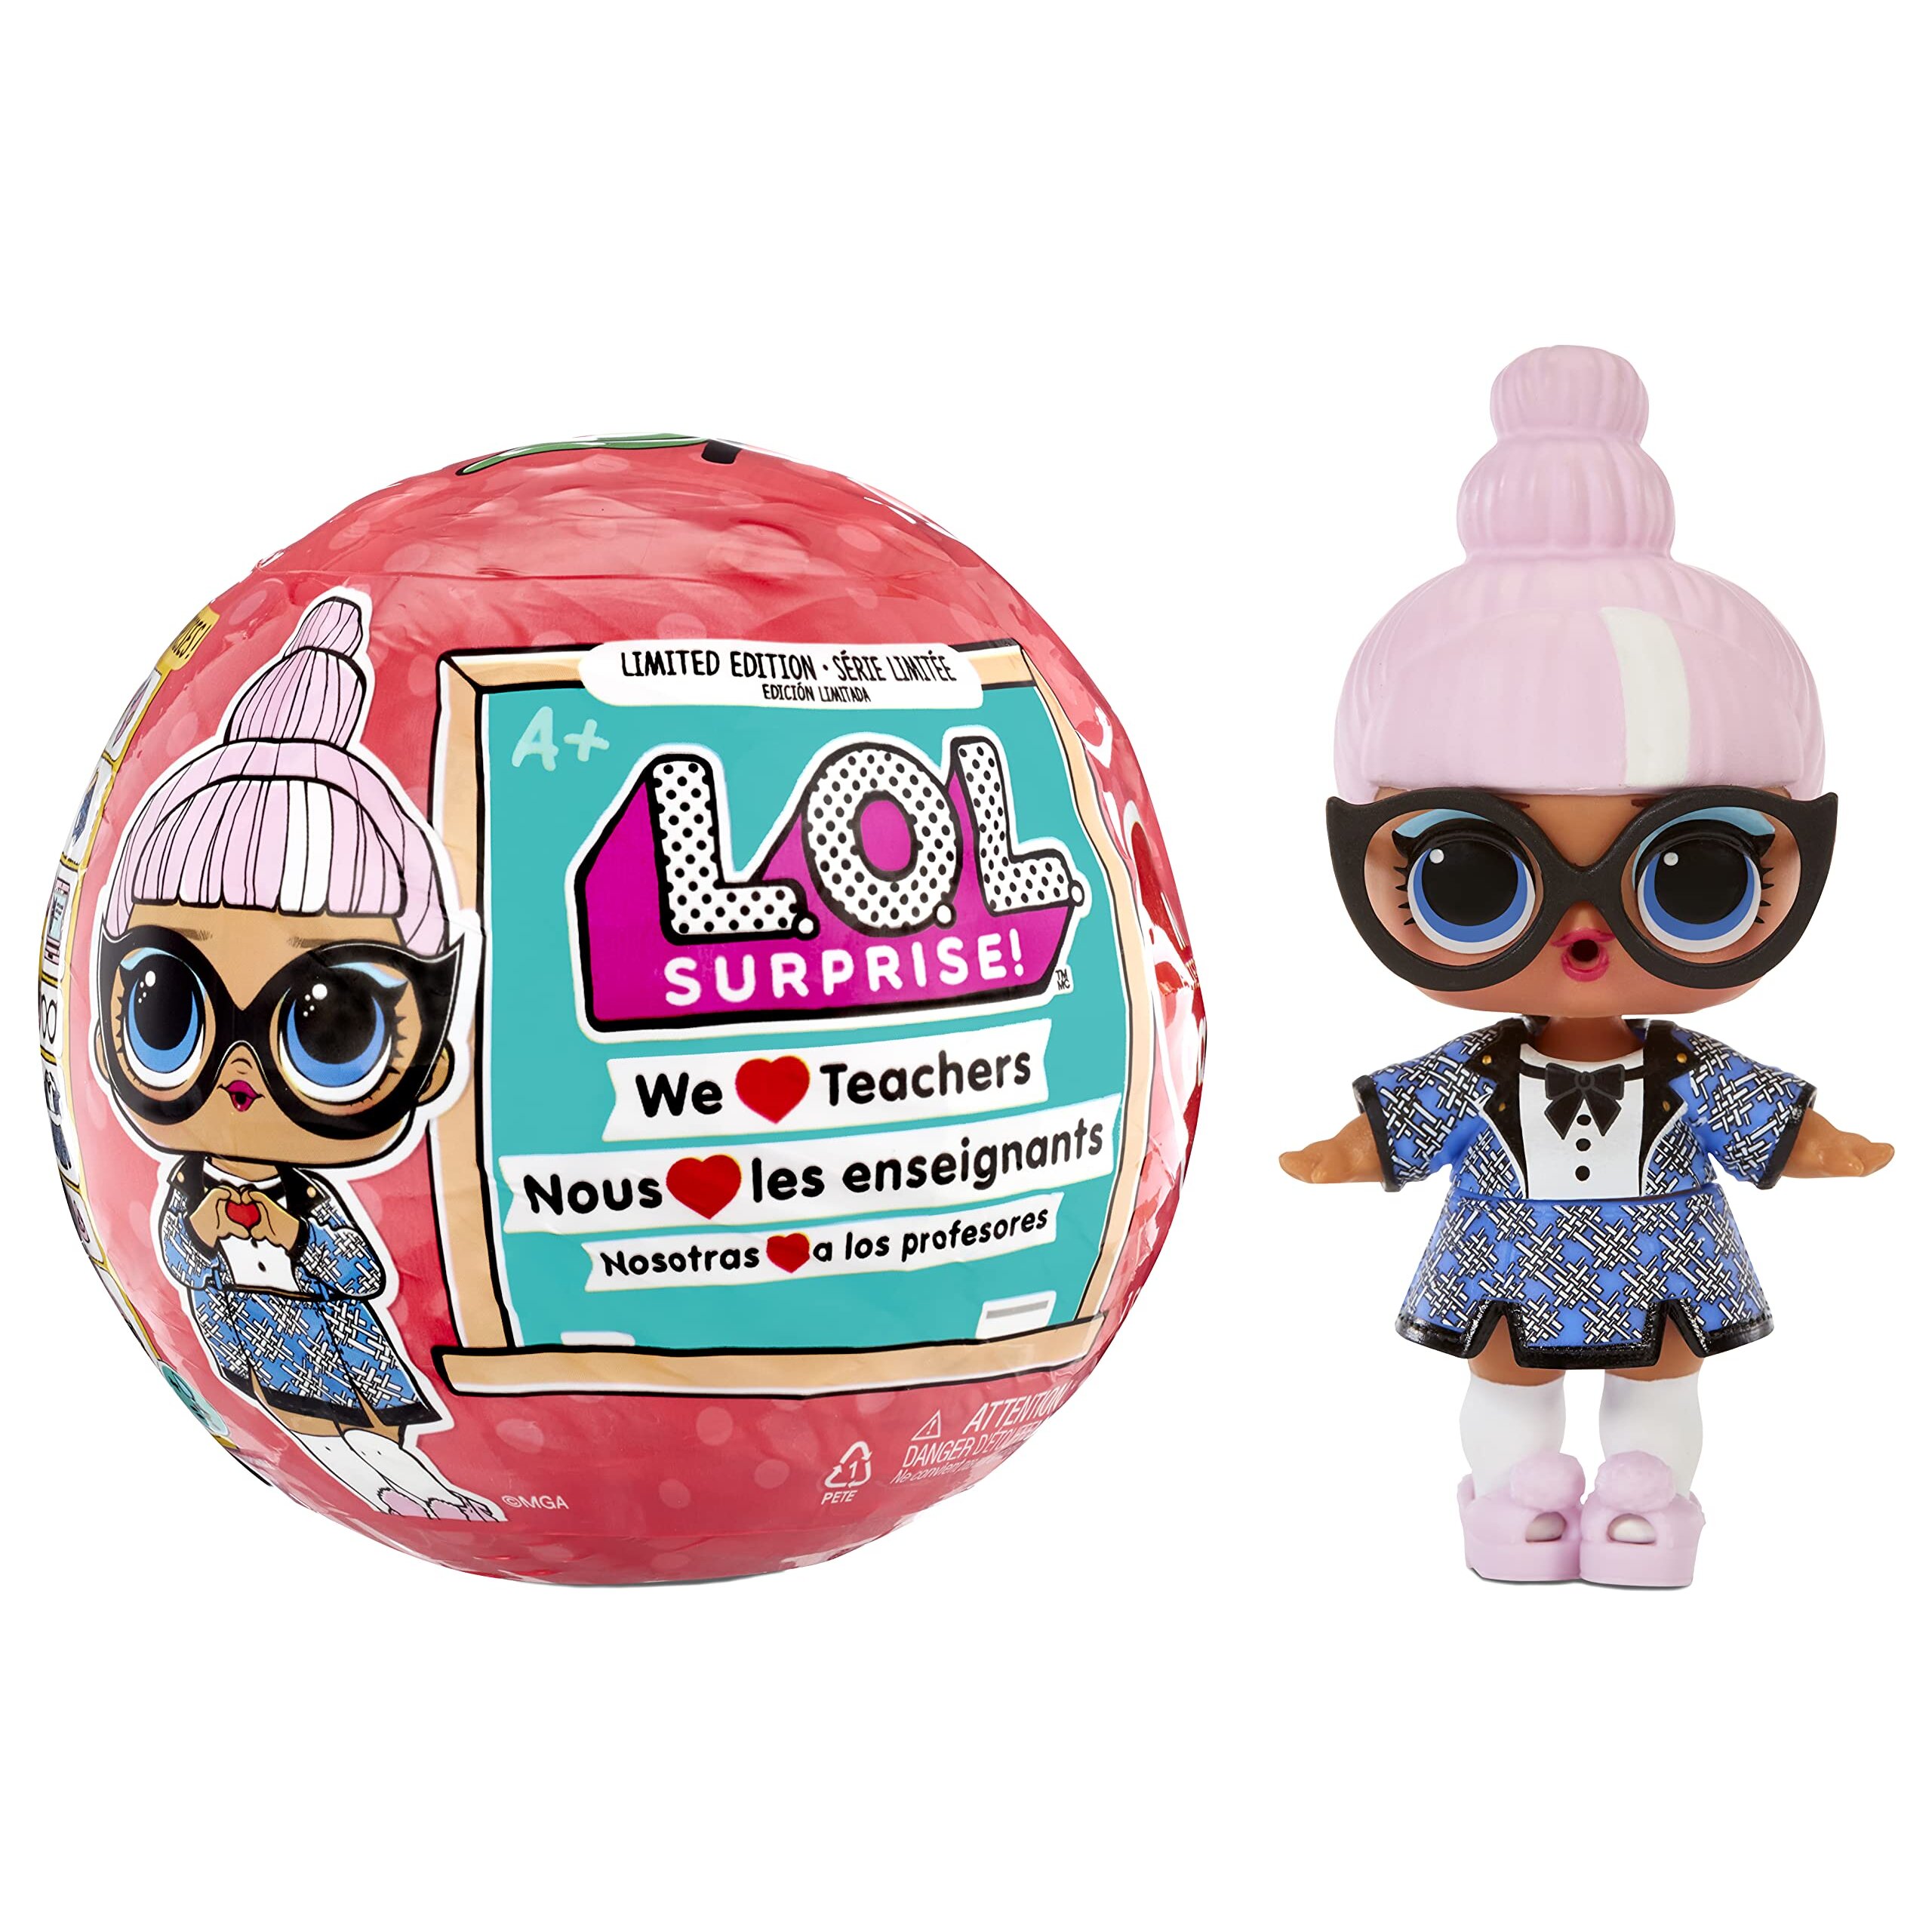 LOL Surprise MgA cares collectible Doll 7+ Surprises Limited Edition Teachers Appreciation Doll with School Themed Accessories, gift for Kids, Toys fo